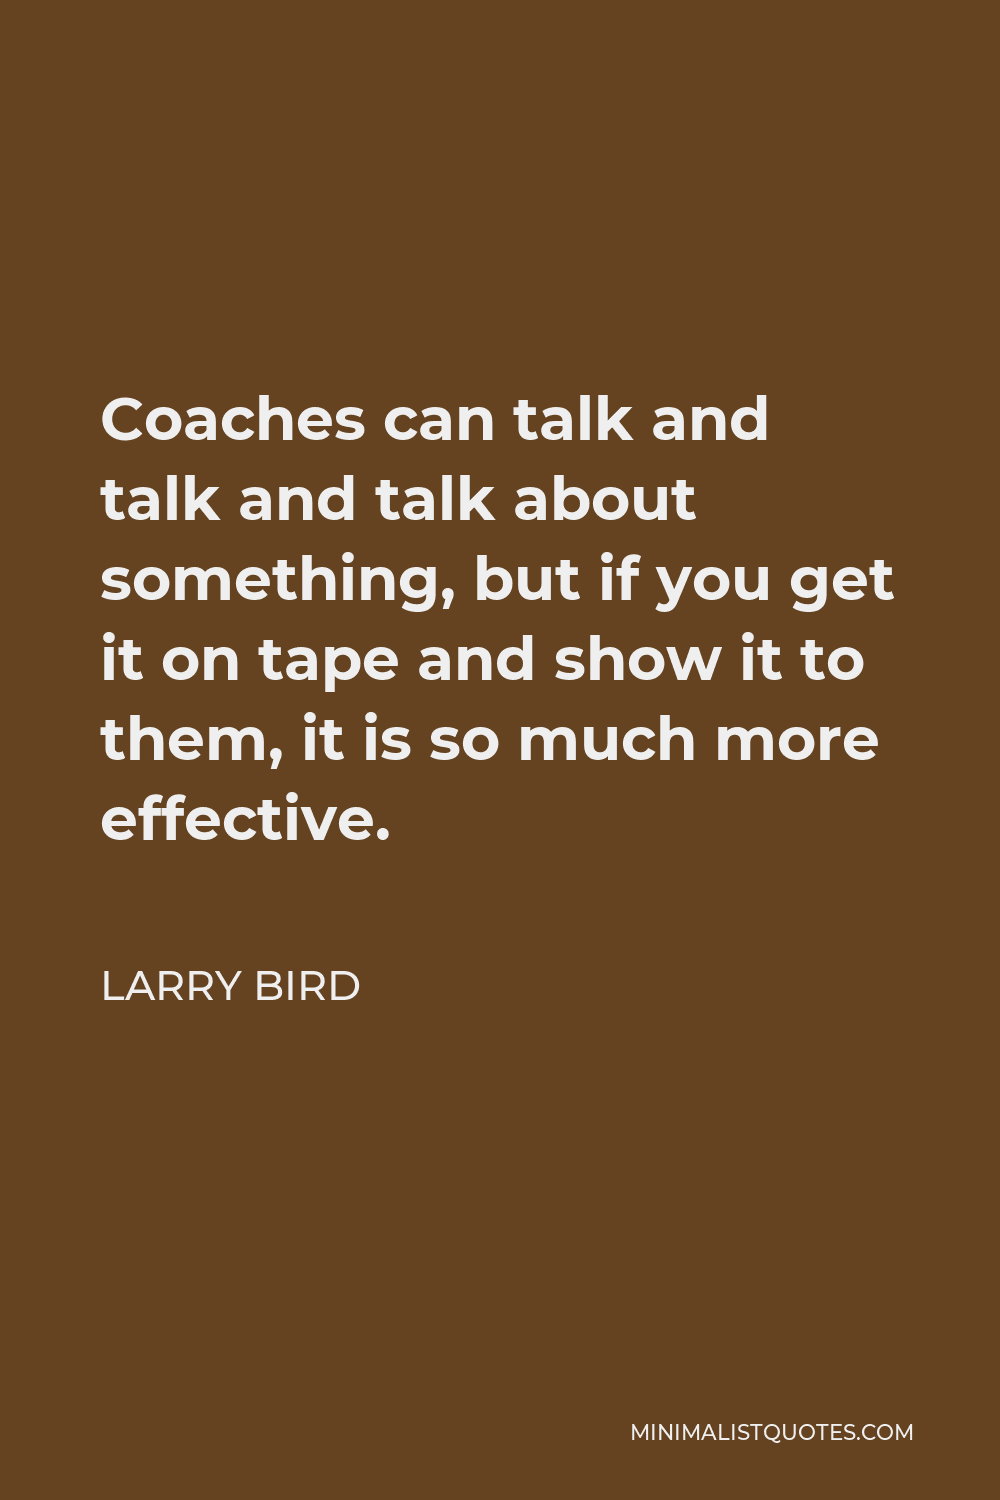 Larry Bird Quote - Coaches can talk and talk and talk about something, but if you get it on tape and show it to them, it is so much more effective.